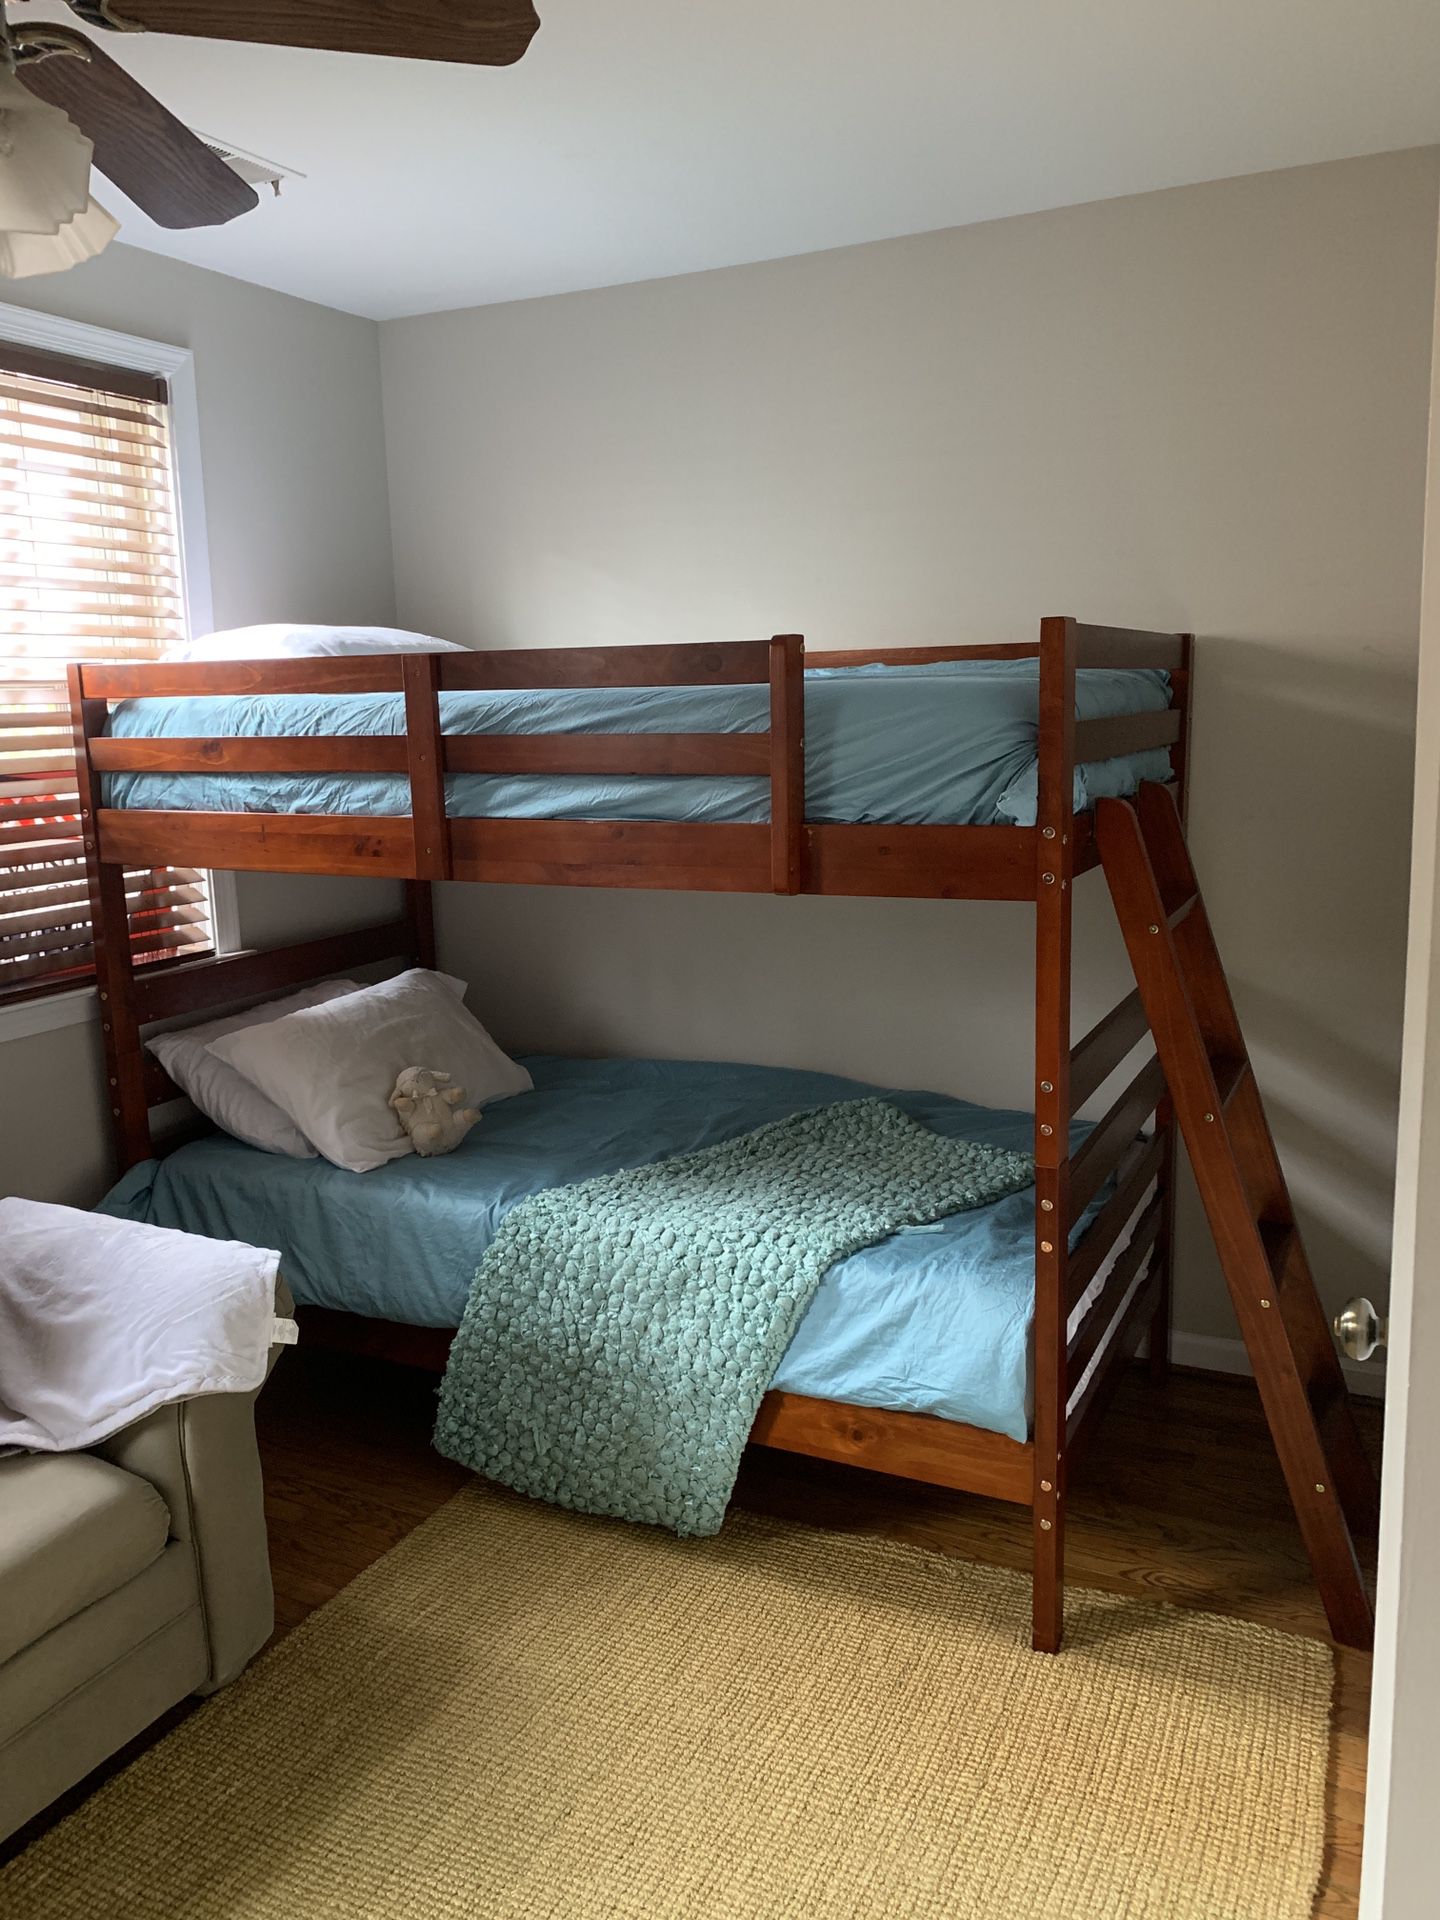 Bunk bed set! Brand new! Bought for $700, on sale for half price!